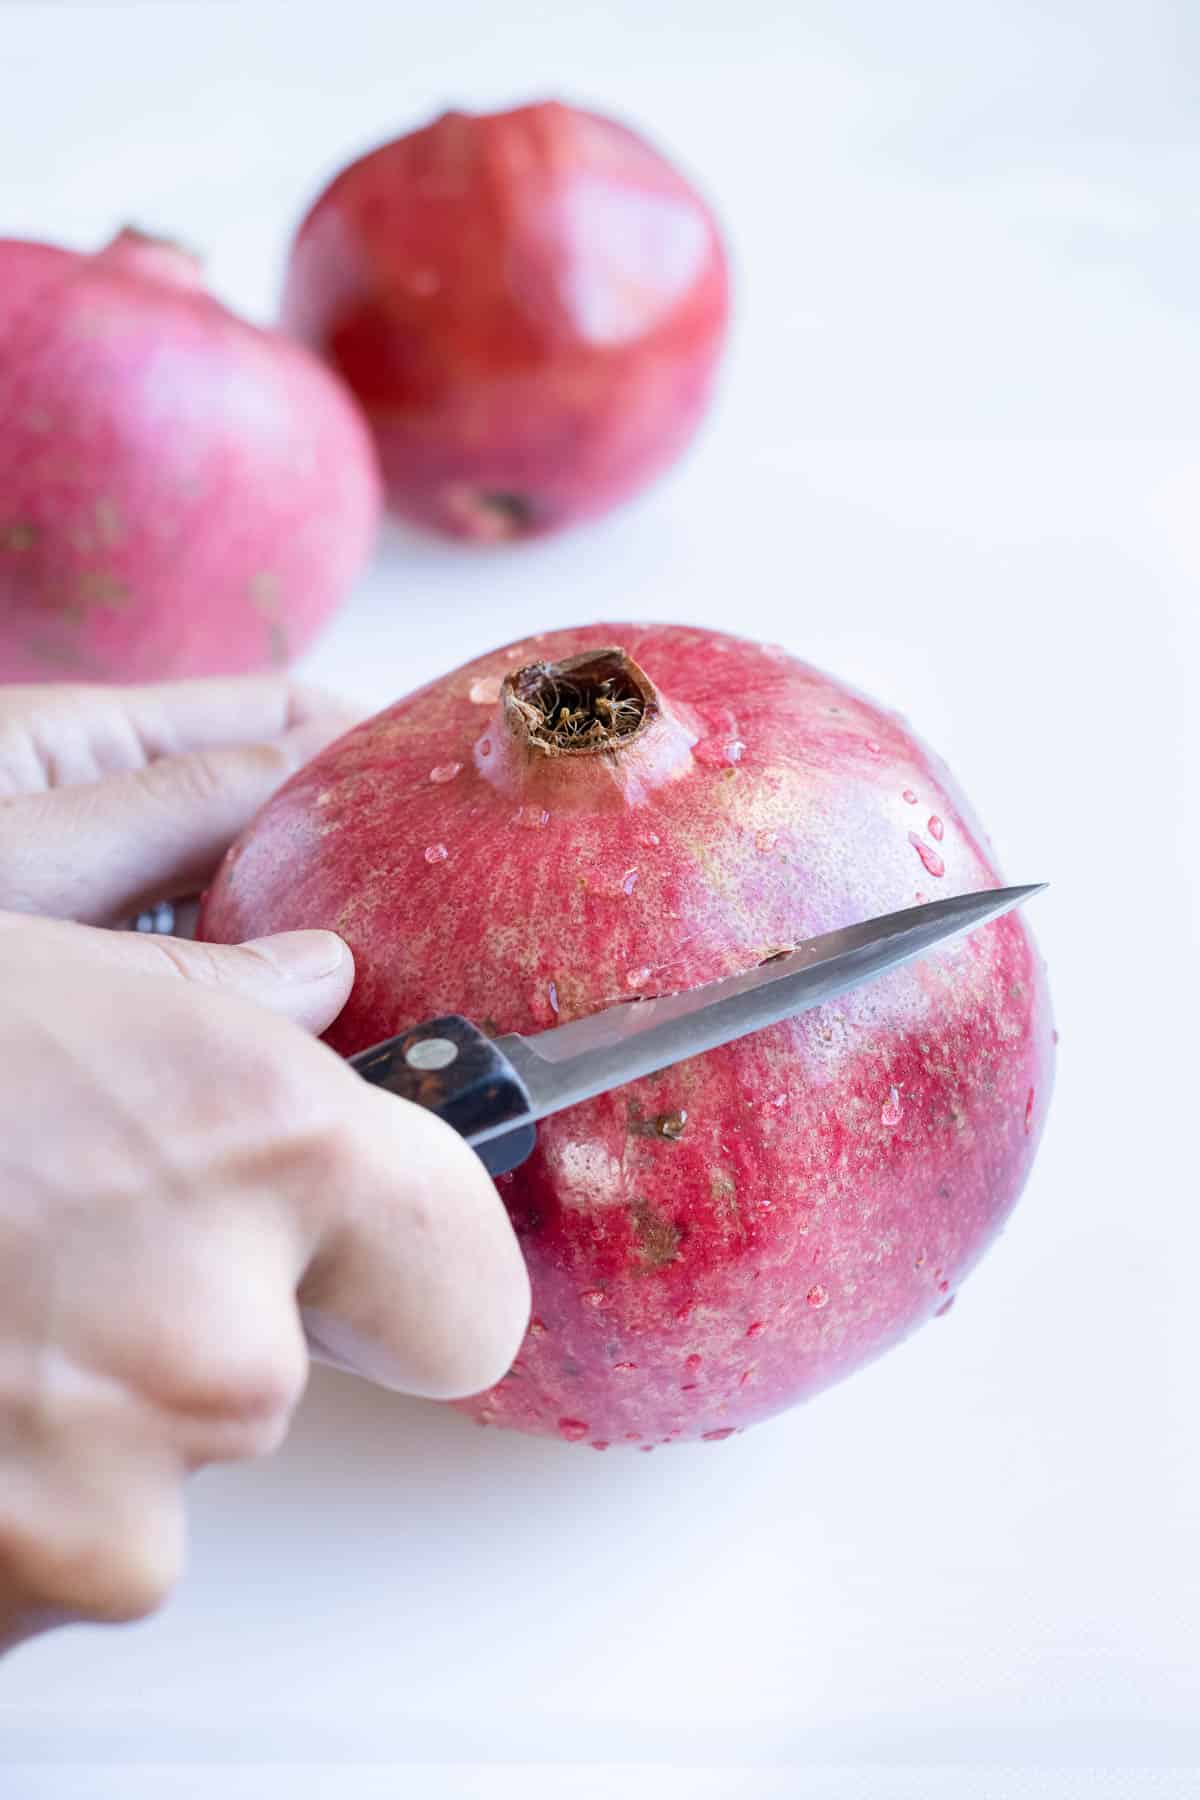 A knife is used to cut the top off of a pomegranate.